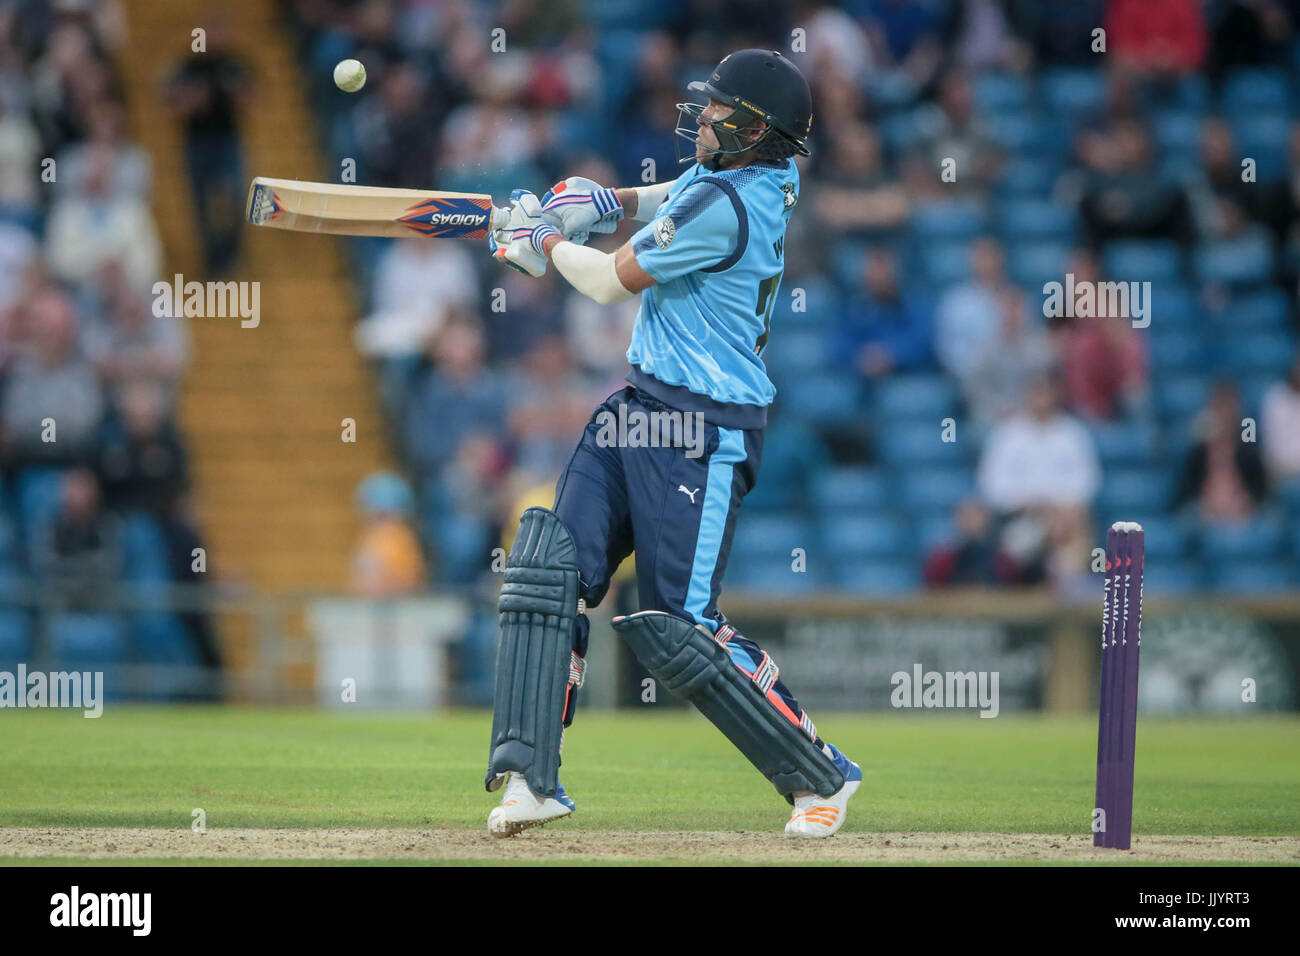 David Wiley hits the ball for six during the Natwest T20 Blast game between Yorkshire County Cricket Club v Warwickshire County Cricket Club on Friday 21 July 2017. Photo by Mark P Doherty. Stock Photo